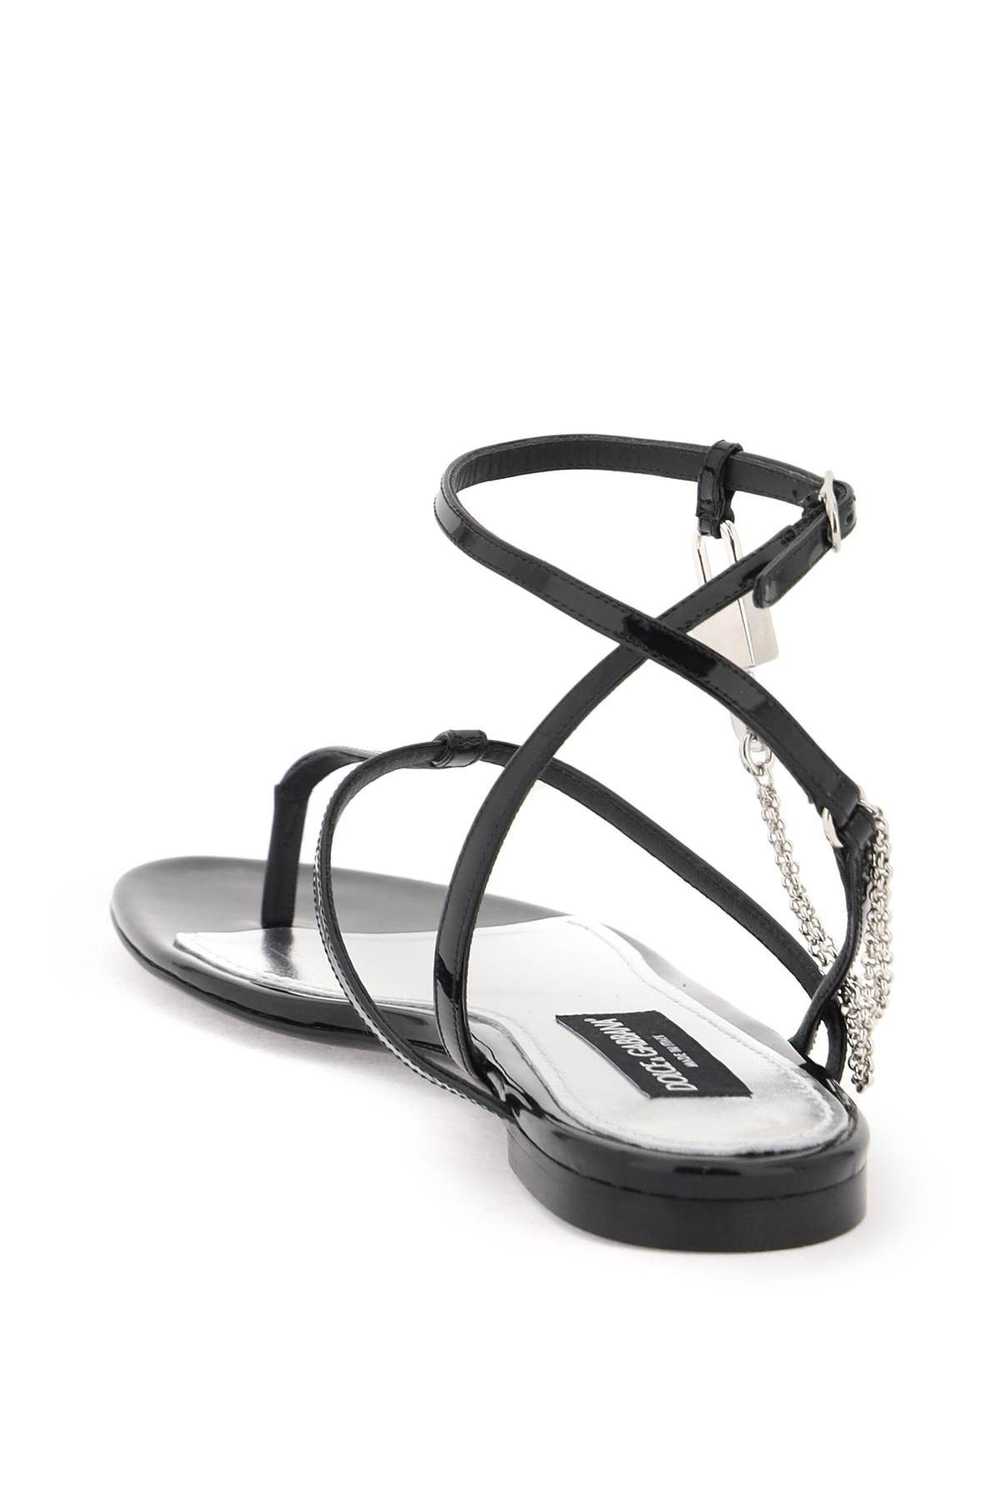 Dolce & Gabbana Patent Leather Thong Sandals With… - image 3